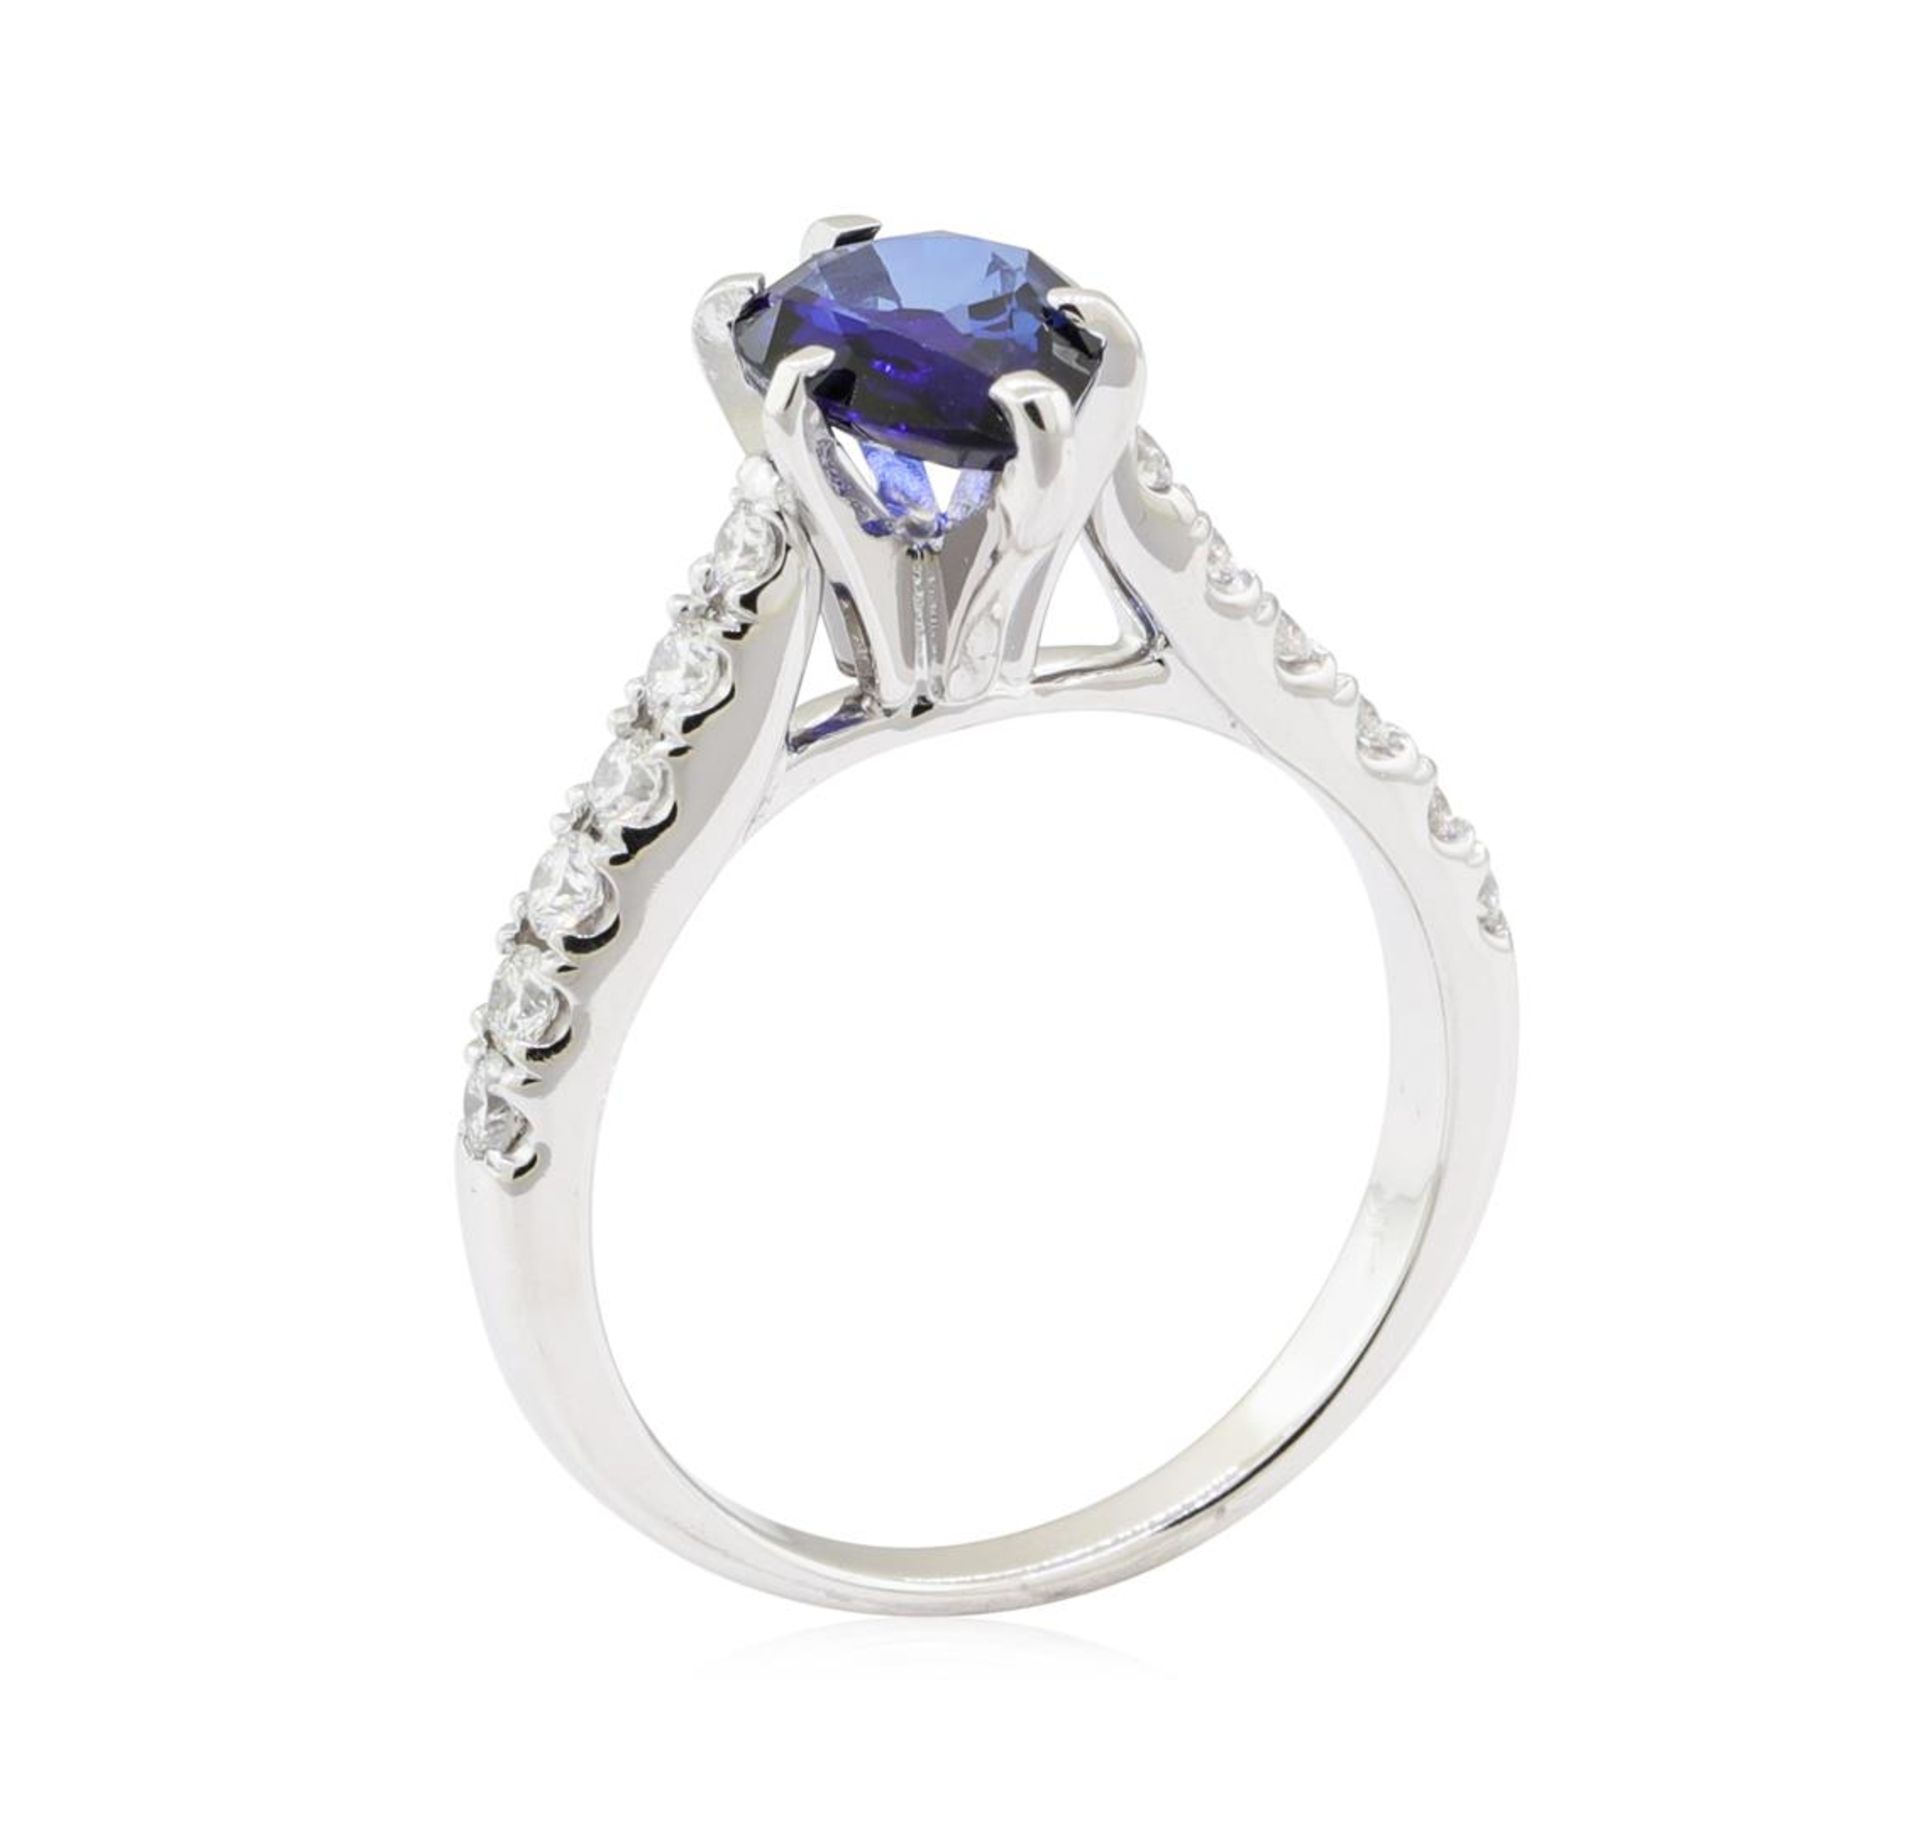 1.99 ctw Sapphire and Diamond Ring - 14KT White Gold - Image 4 of 5